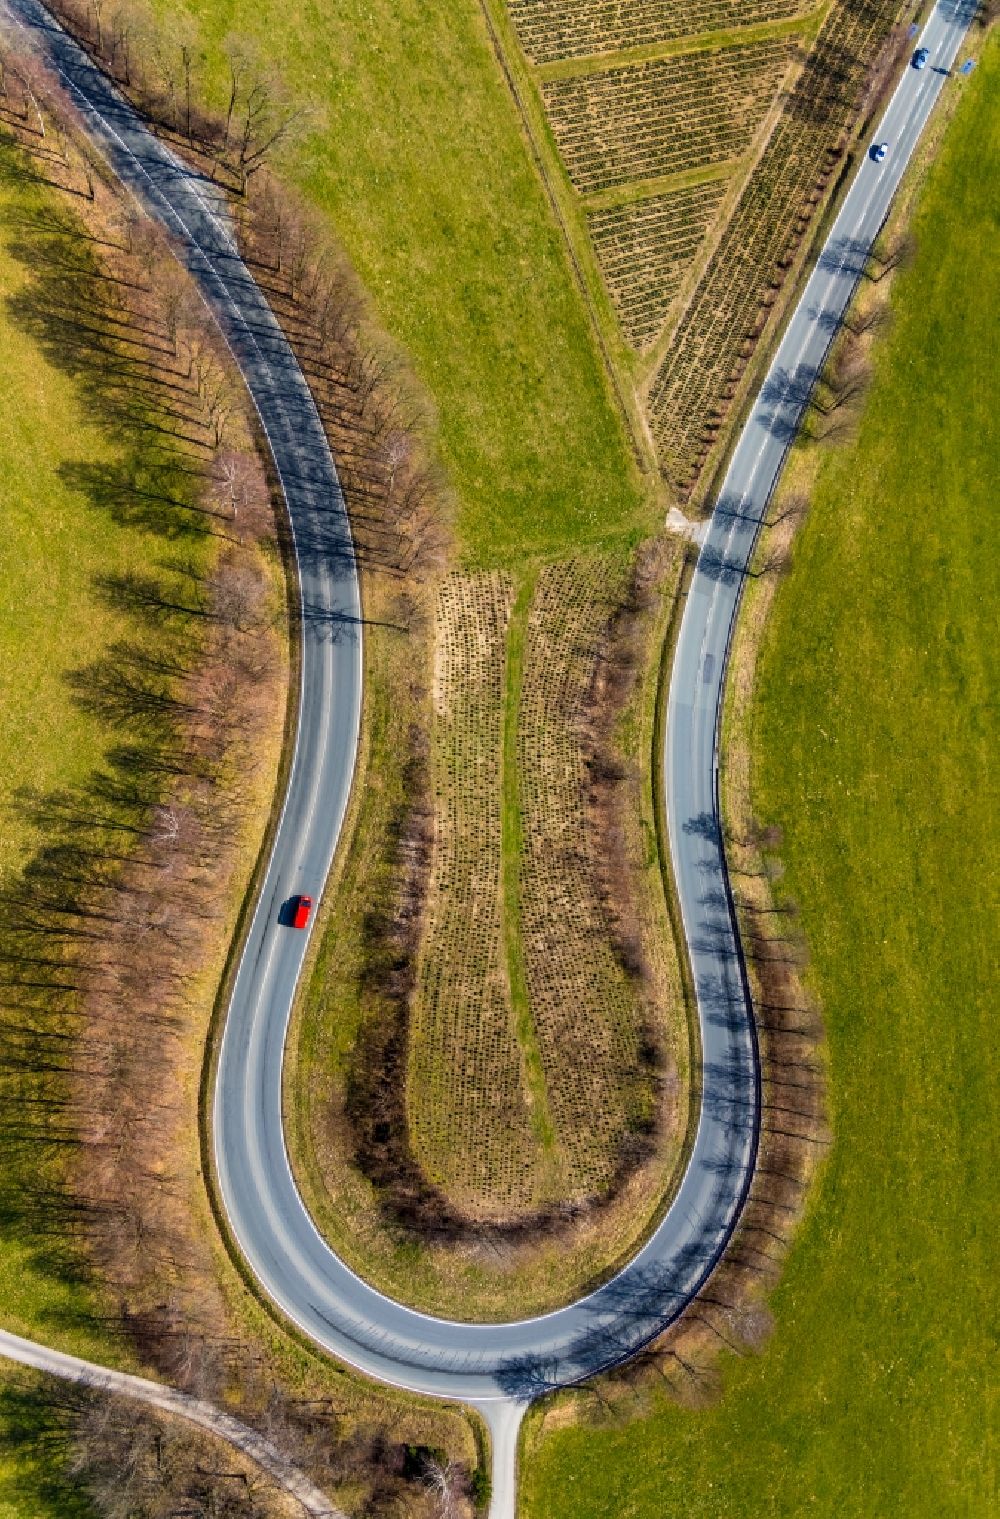 Olsberg from above - A serpentine curve of a road layout north of Olsberg in the state of North Rhine-Westphalia, Germany